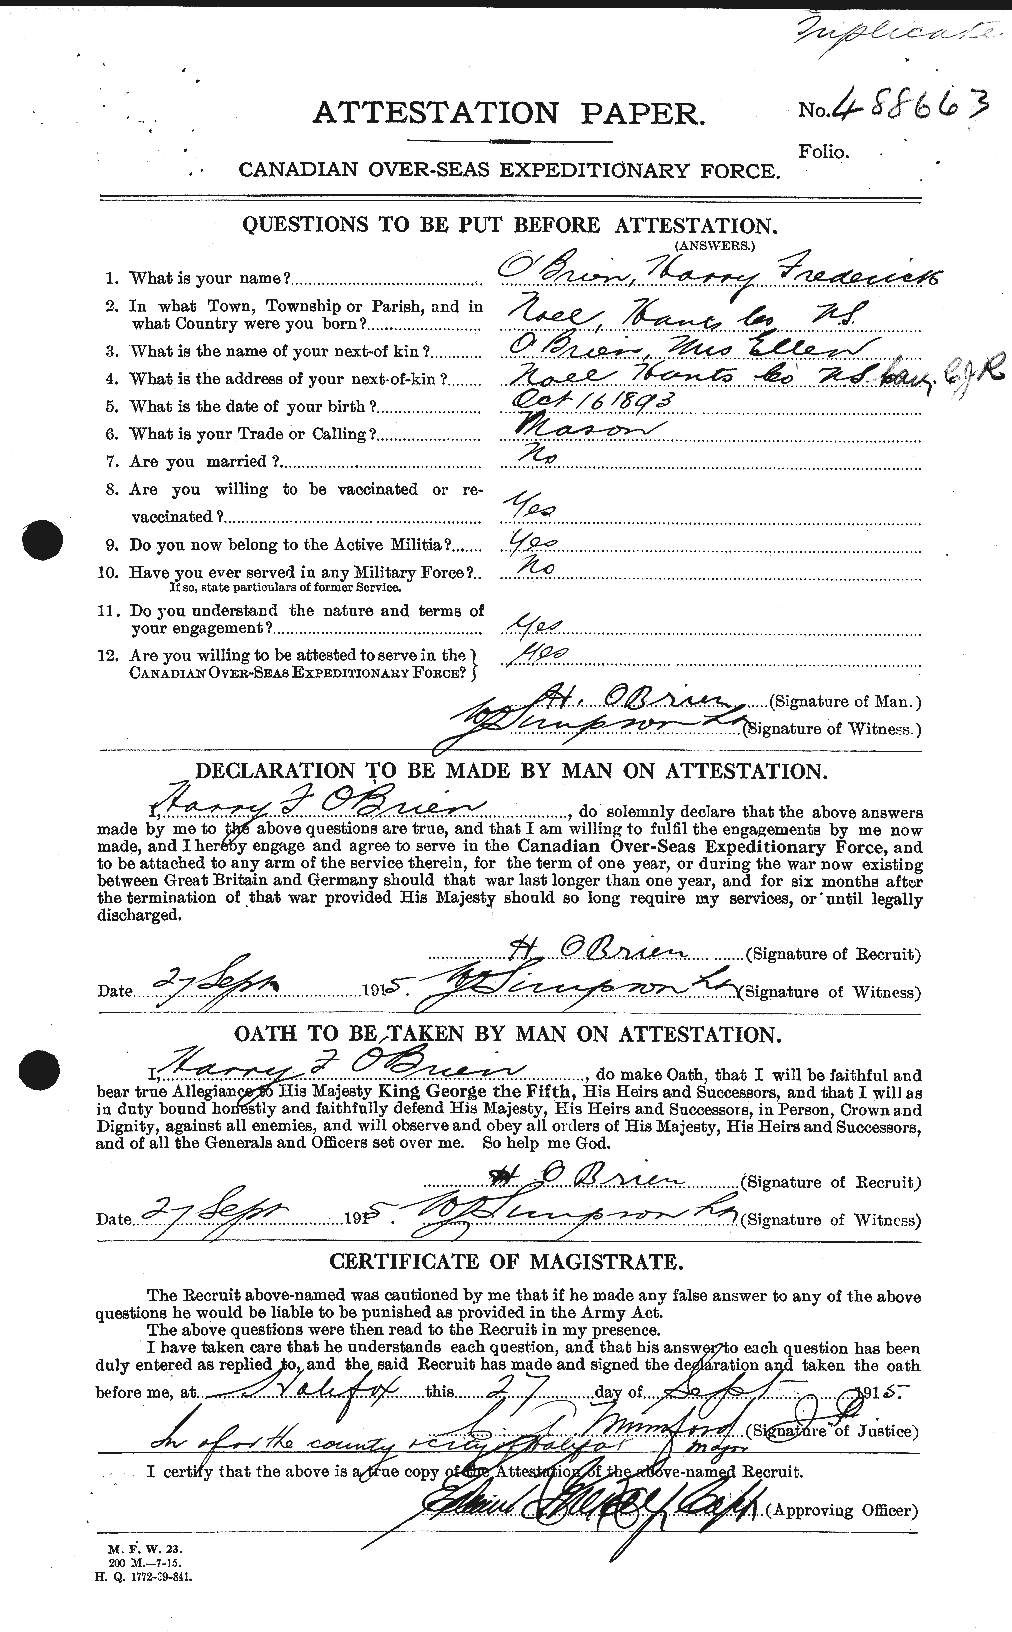 Personnel Records of the First World War - CEF 554048a